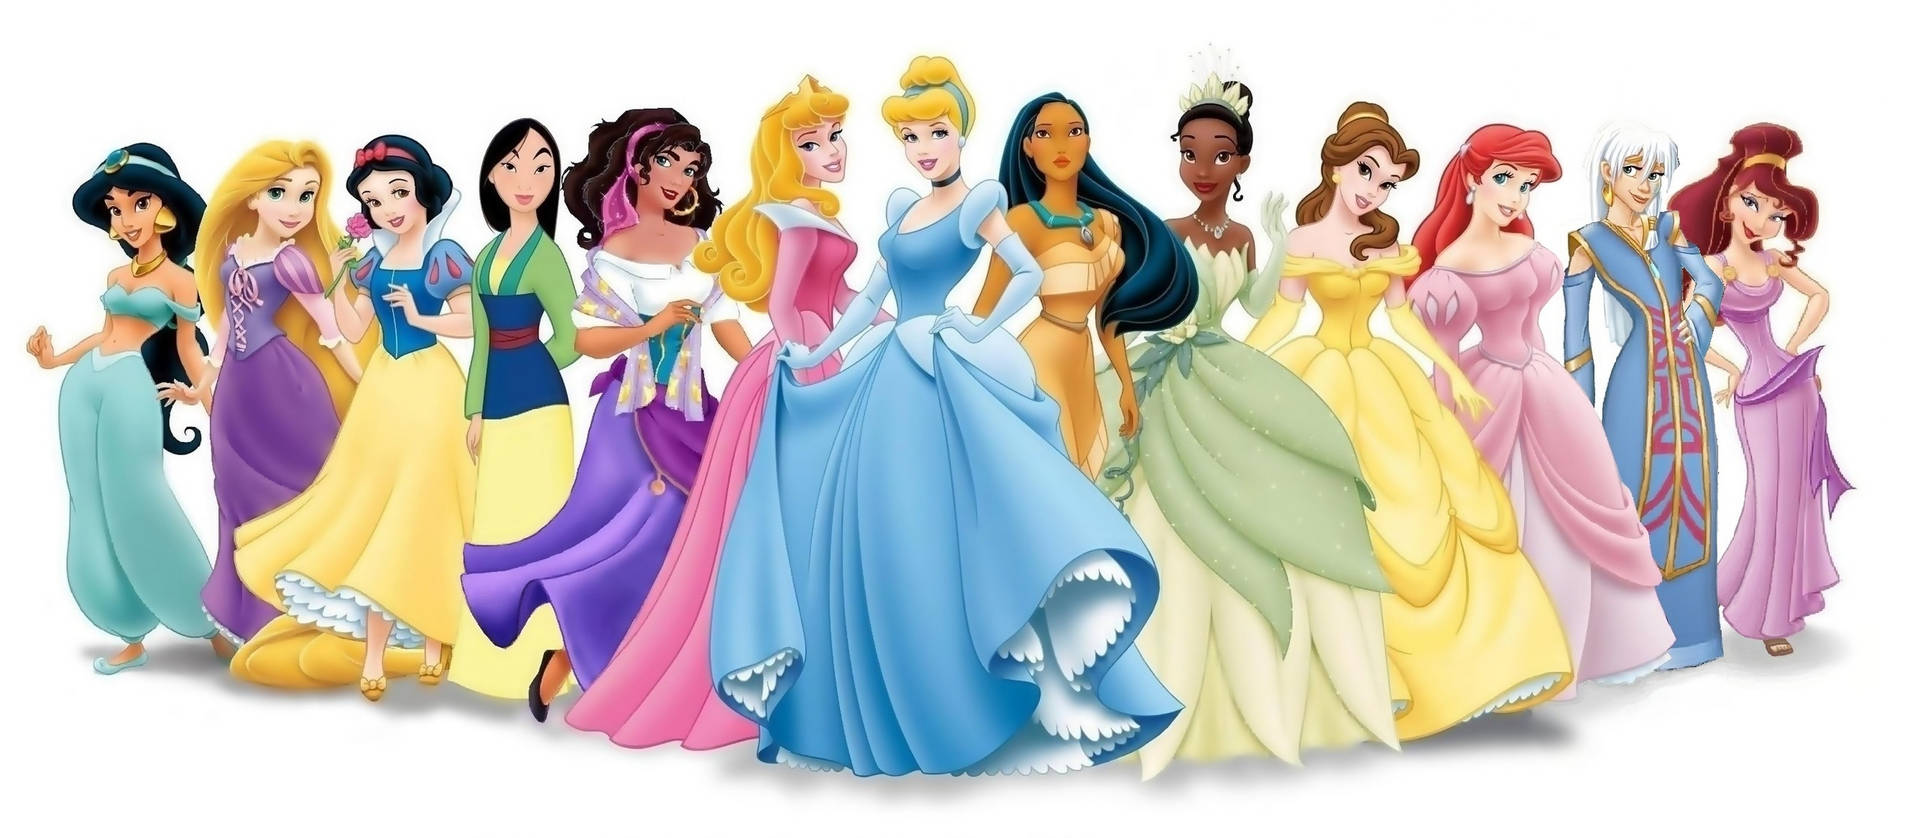 Disney Princesses In Colorful Dresses Background